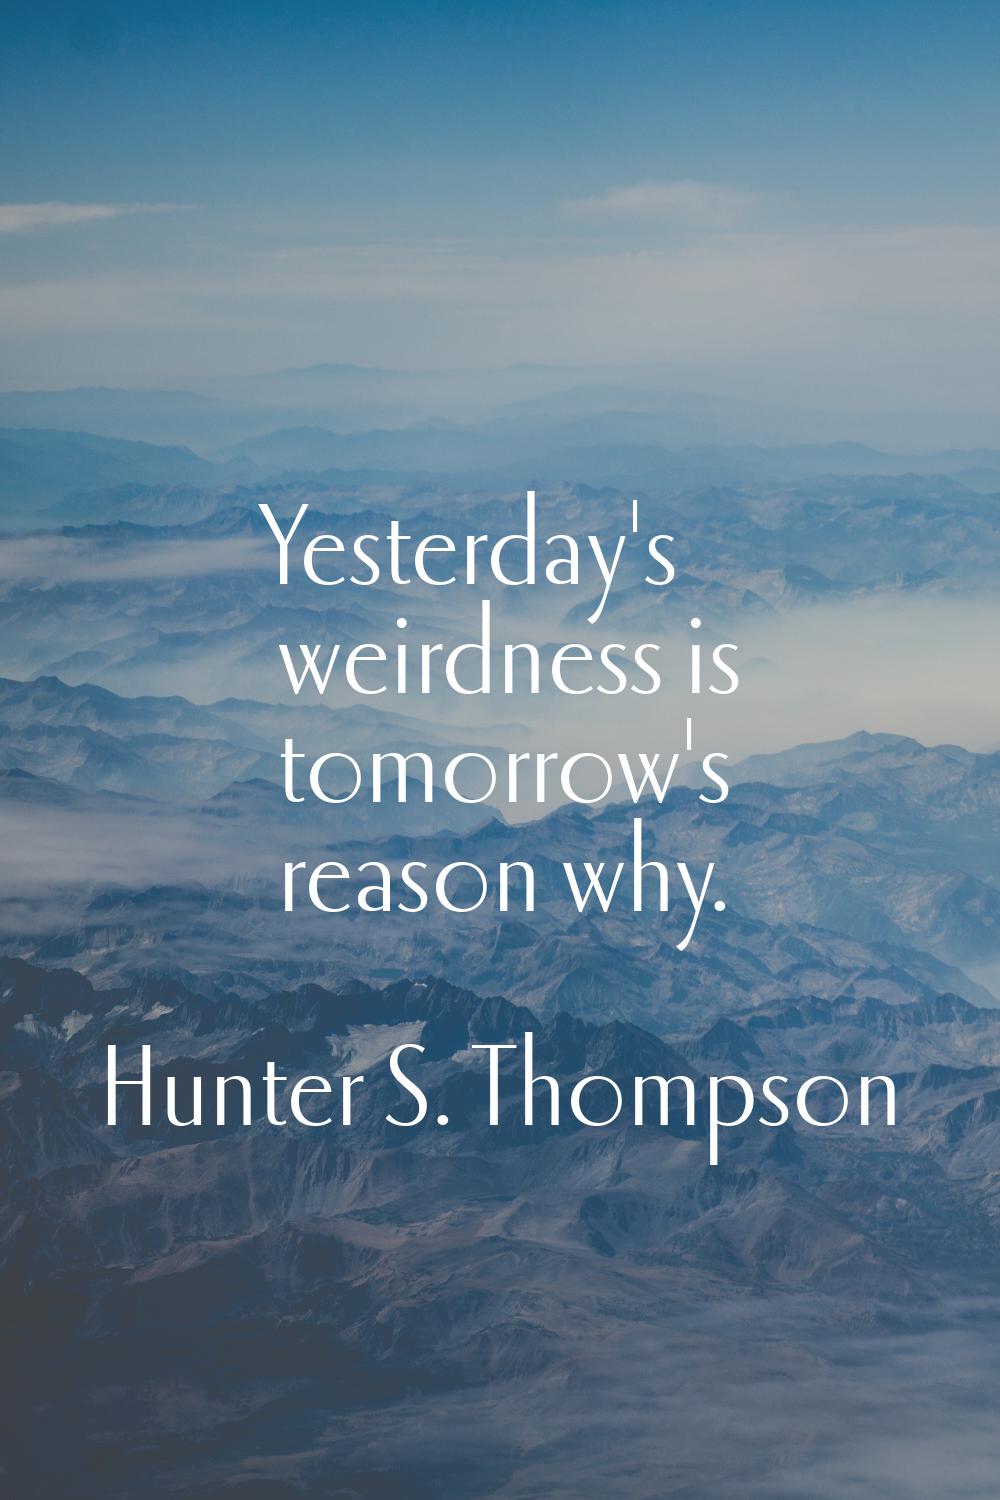 Yesterday's weirdness is tomorrow's reason why.